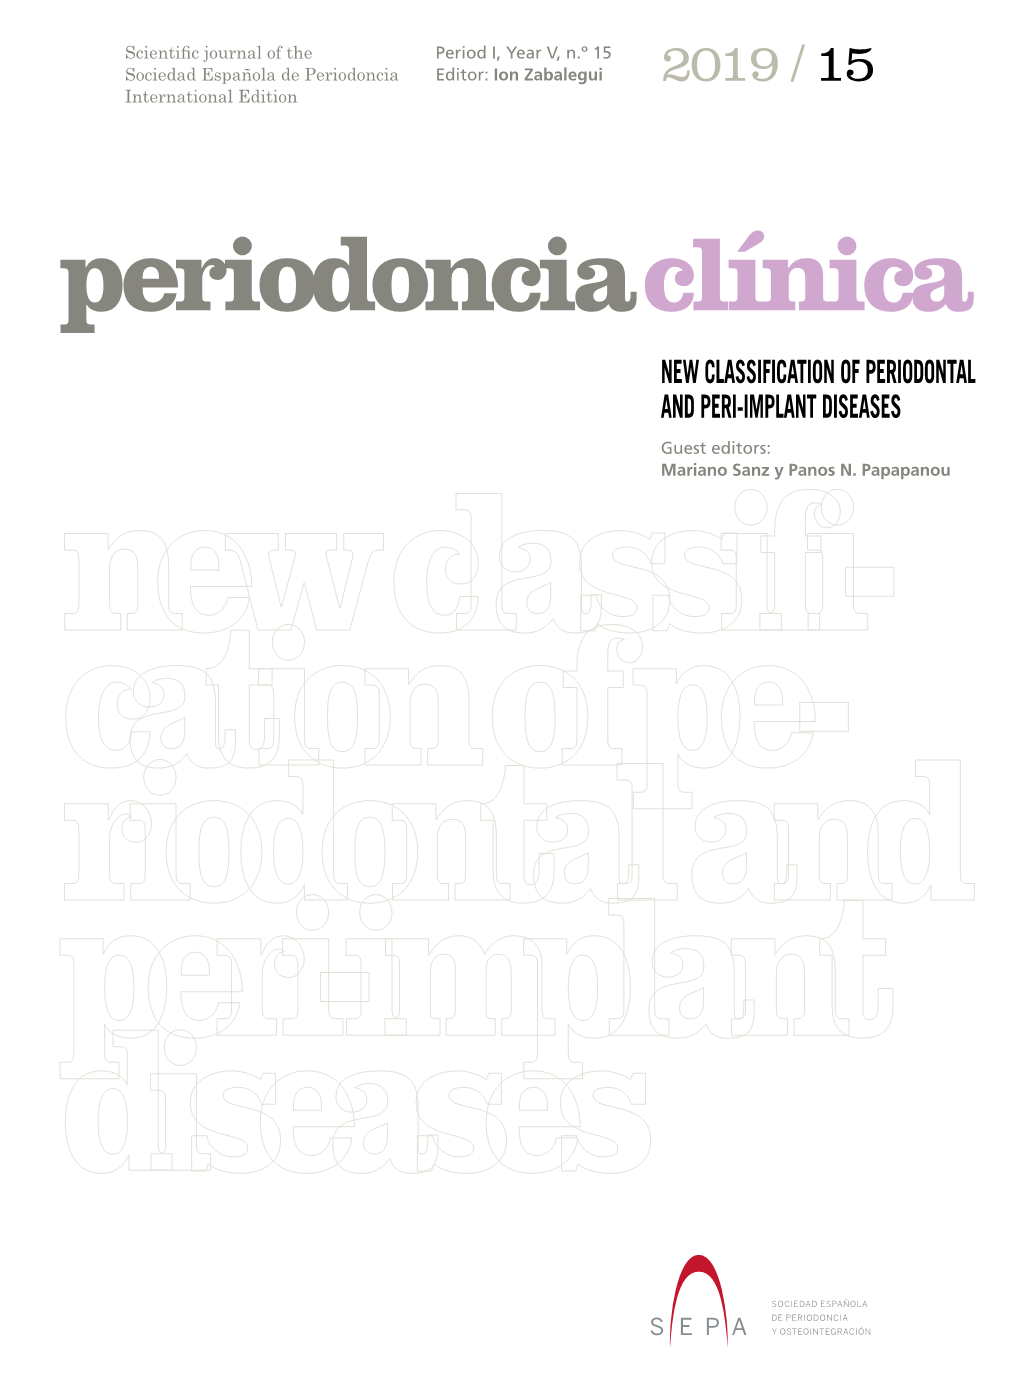 NEW CLASSIFICATION of PERIODONTAL and PERI-IMPLANT DISEASES Guest Editors: Mariano Sanz Y Panos N